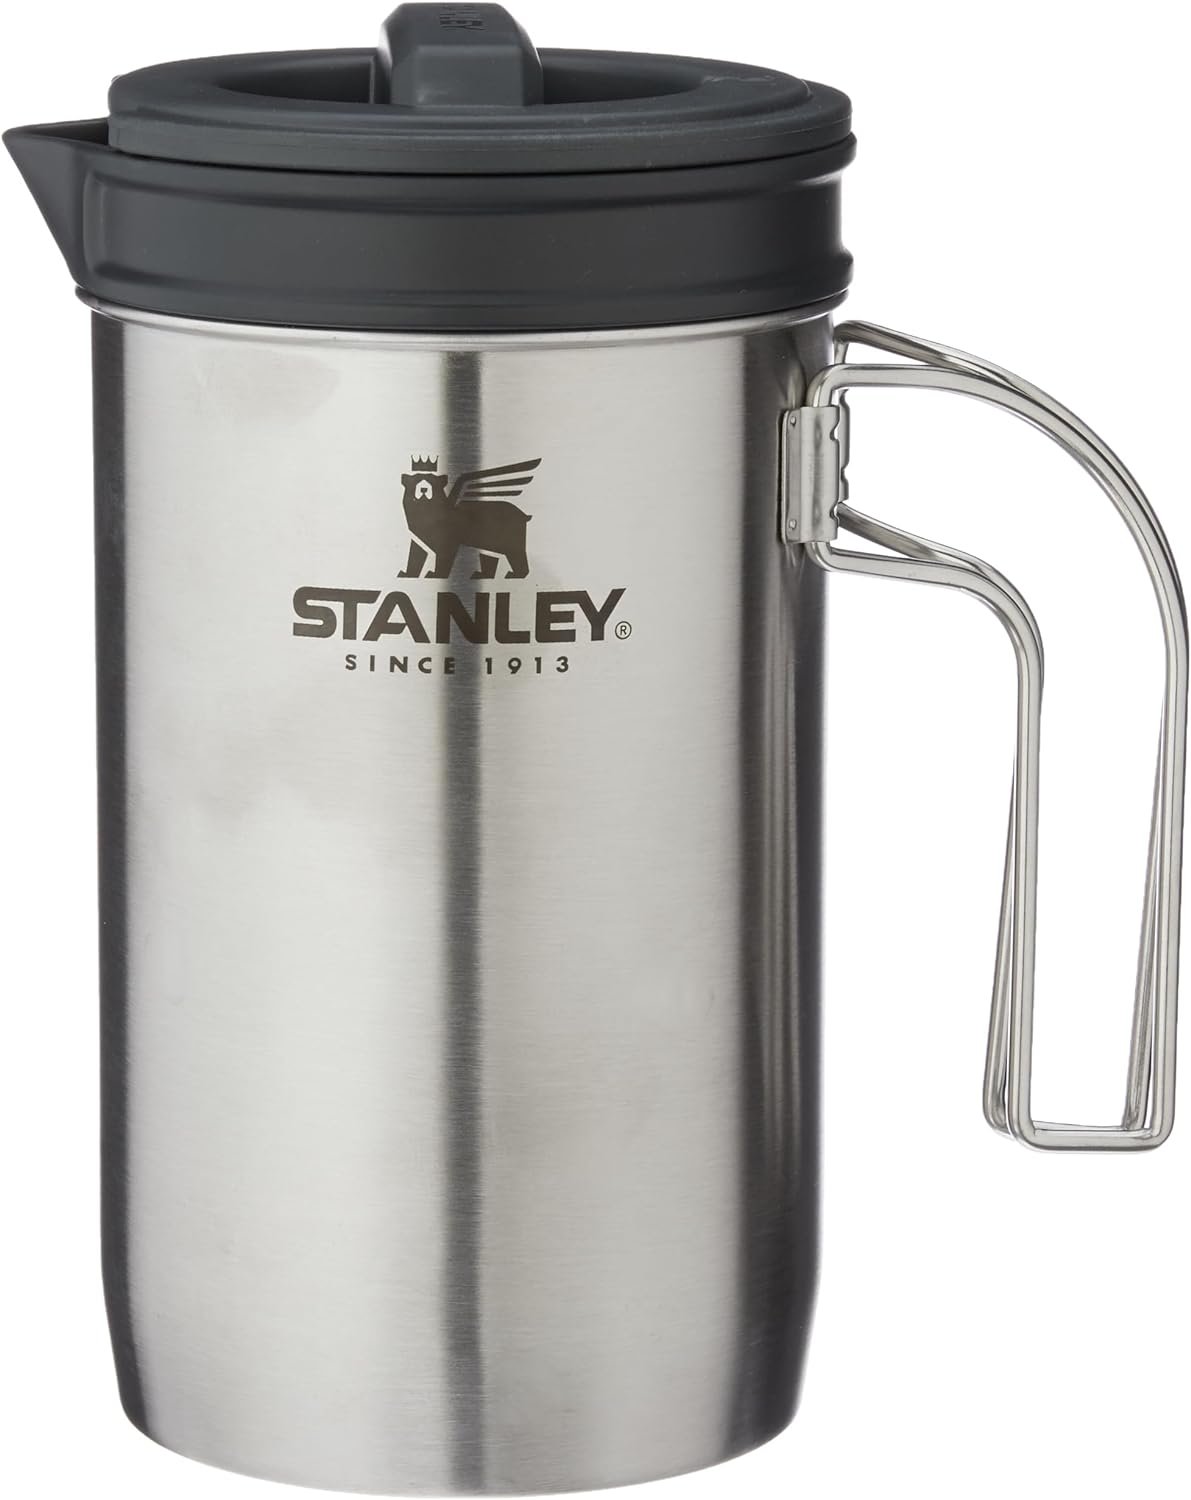 STANLEY Adventure French Press Review